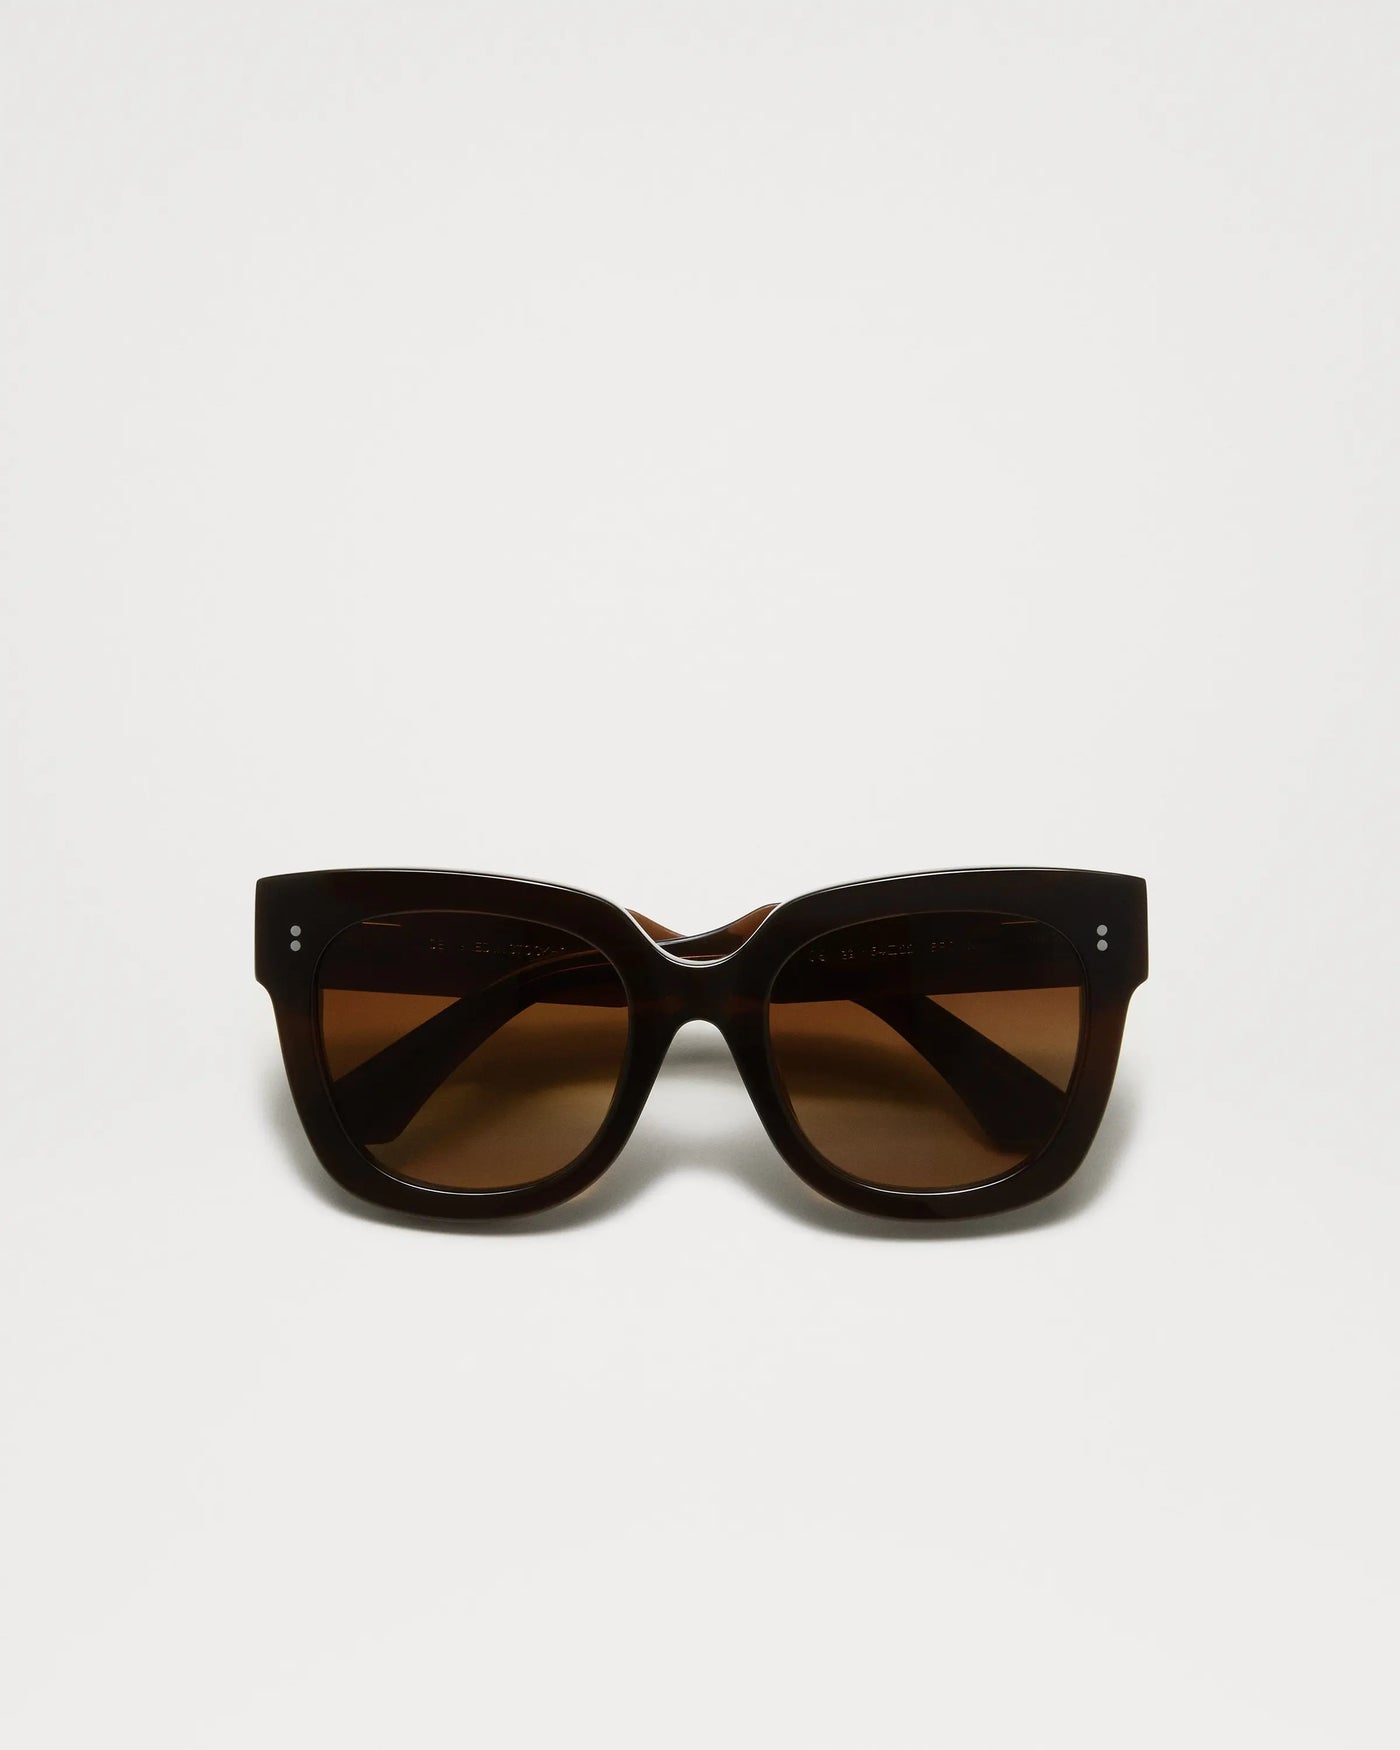 Lunettes 08 Brown